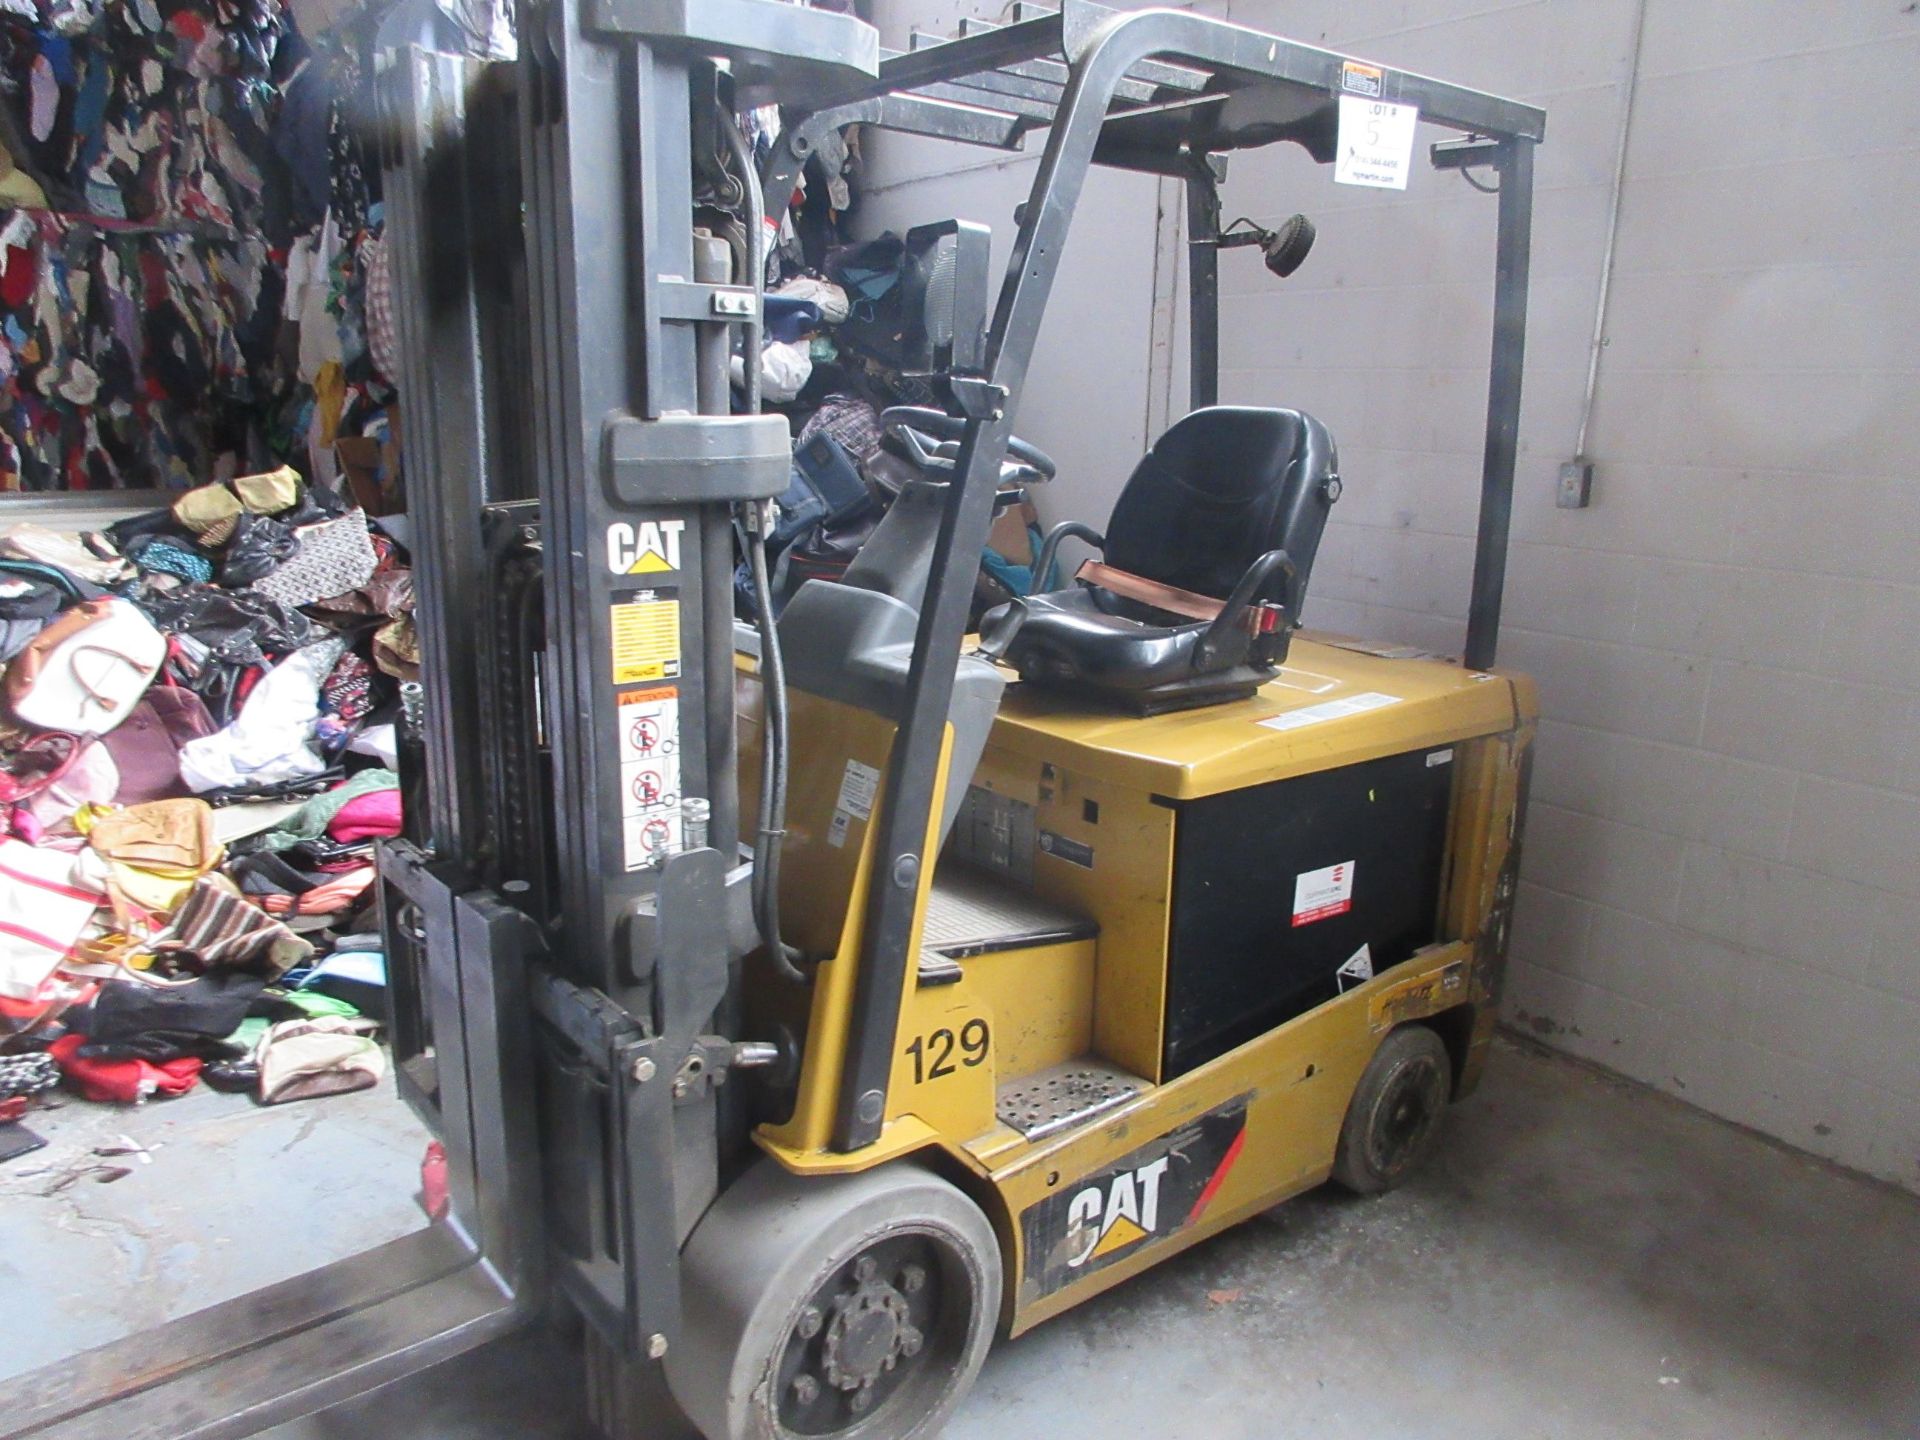 CATERPILLAR electric forklift Mod: EC30N2, 3 sections, 6000 LB capacity, 48V c/w charger 48V, DC128, - Image 2 of 8